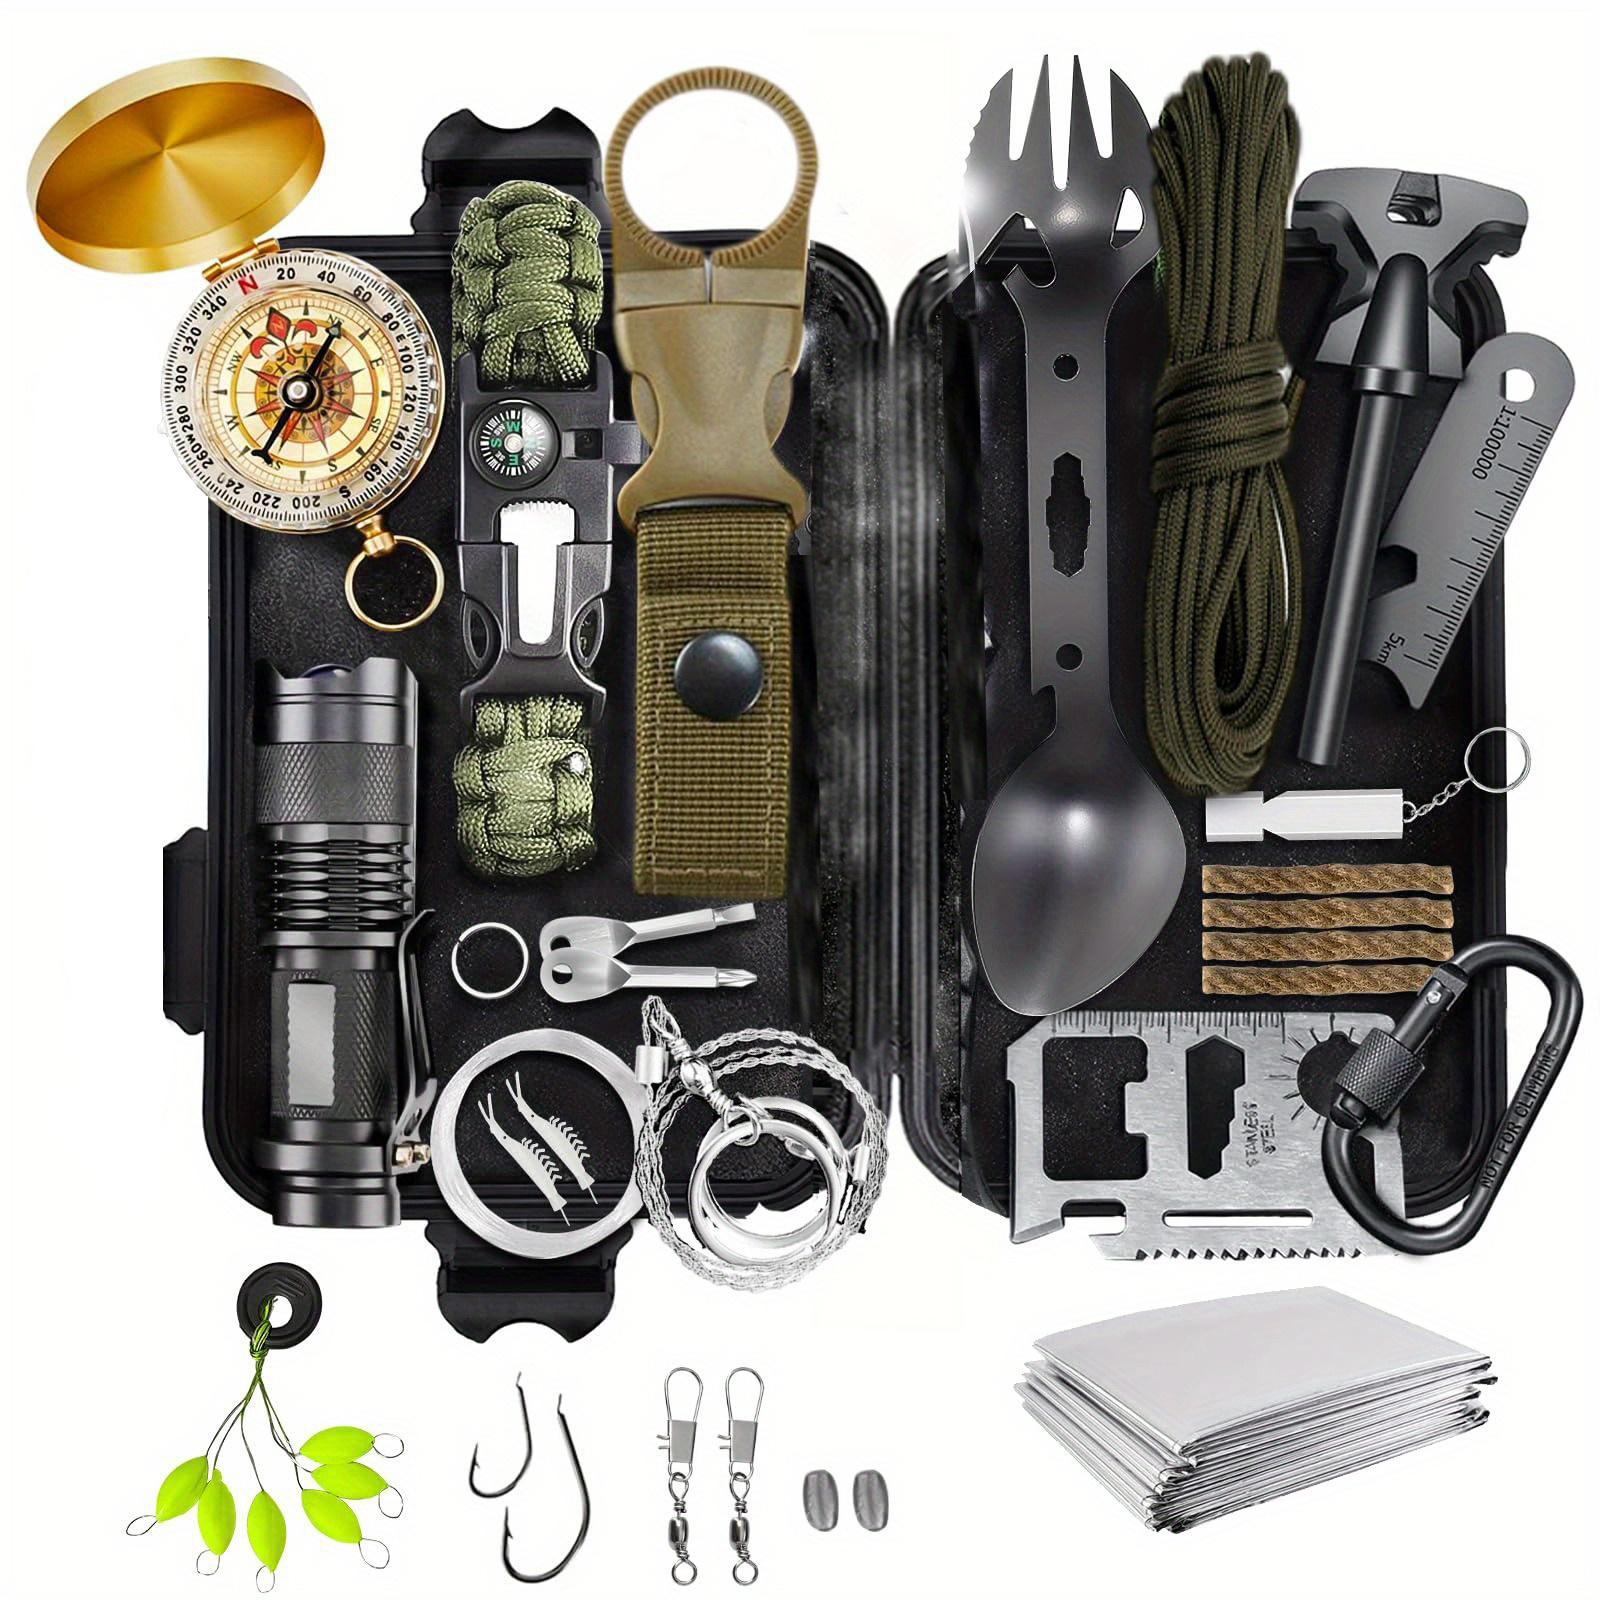  Survival Gear Kit, 21 in 1 Survival Gear and Equipment, Cool  Top Gadgets Christmas Birthday Gifts for Men Dad Him Husband Boyfriend Teen  Boy Camping Fishing Hunting Hiking : Sports & Outdoors